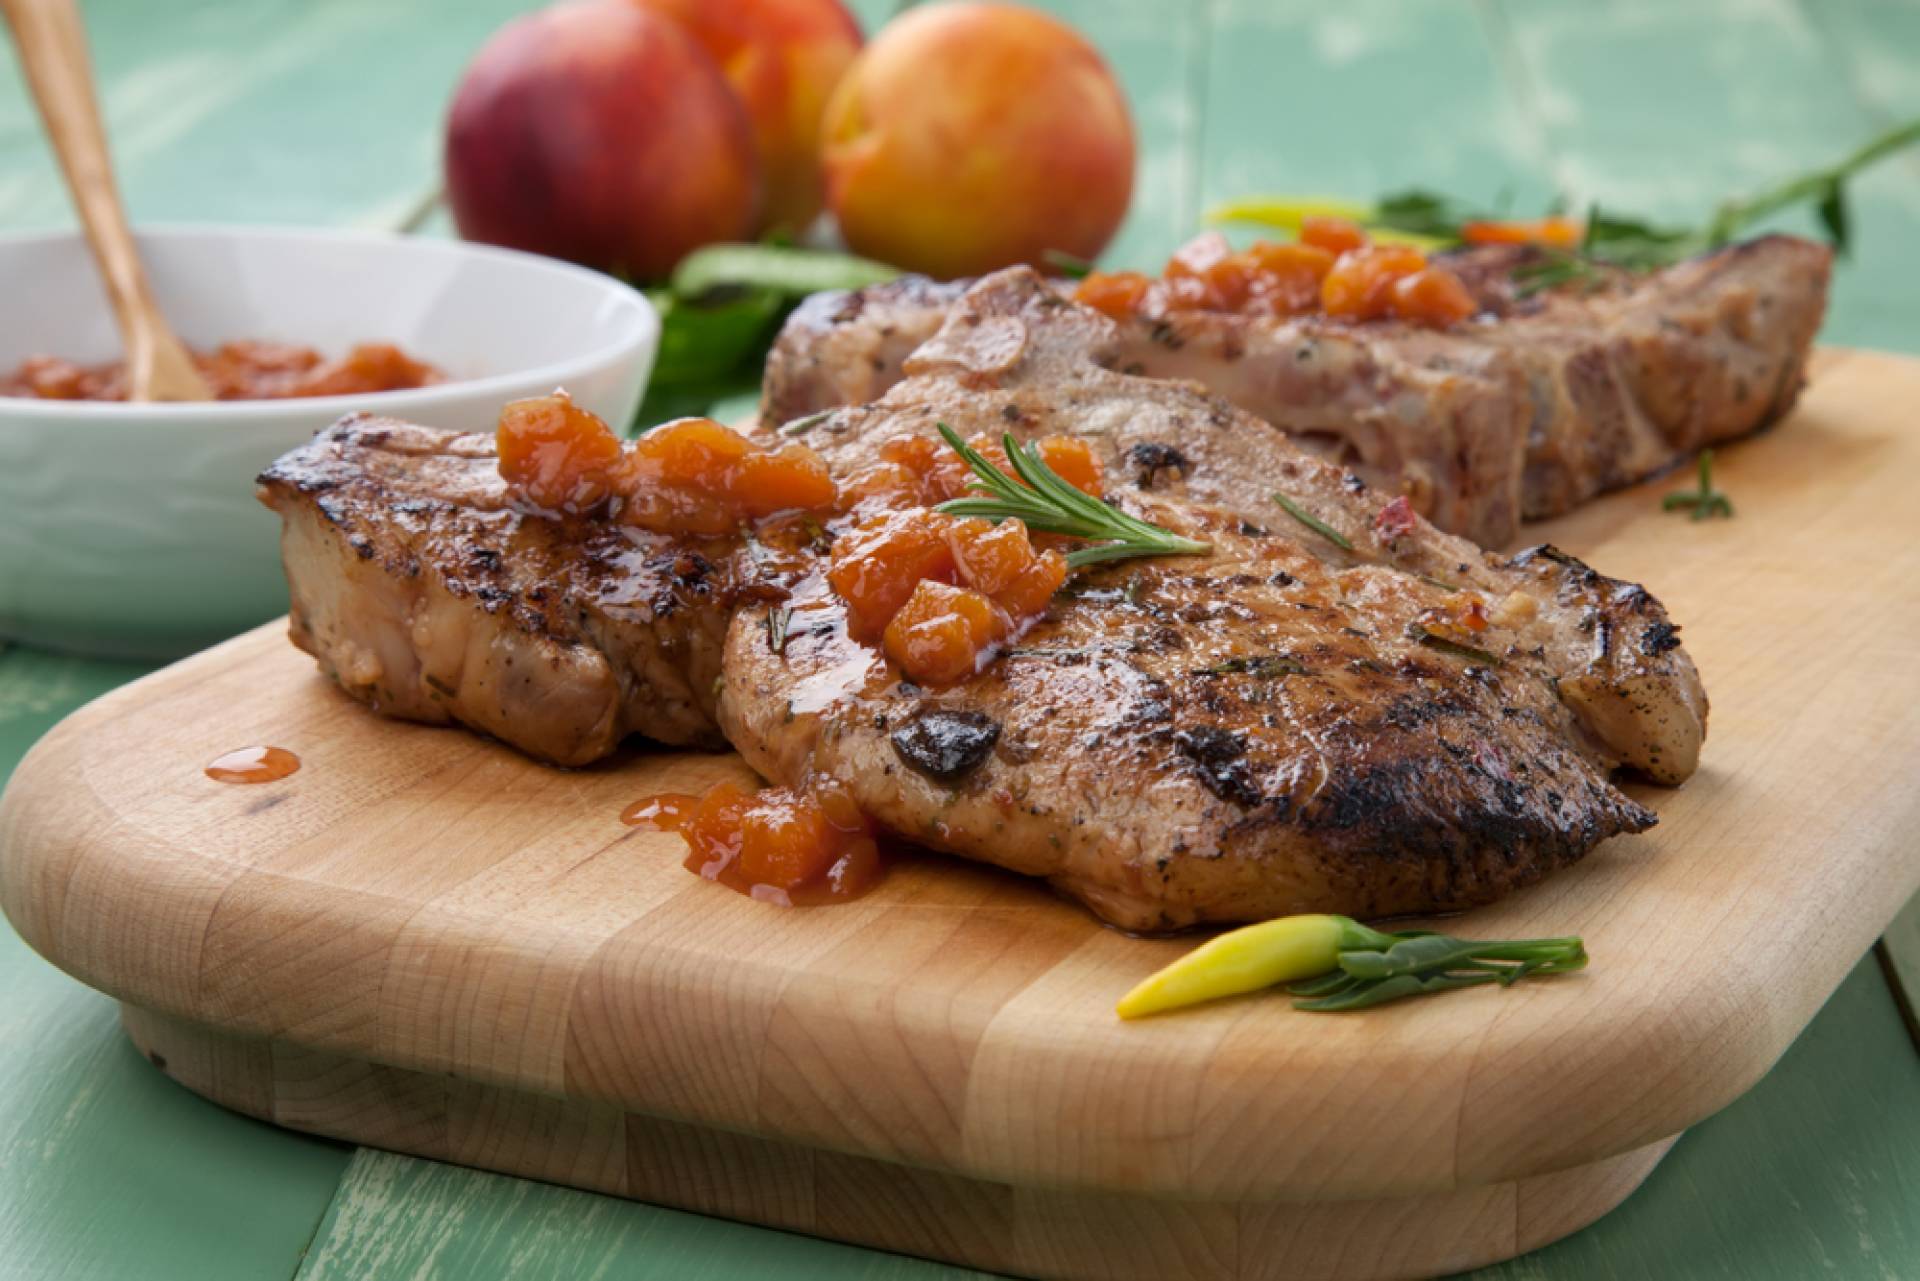 Grilled Pork Chop with Sweet Apple Chili Chutney